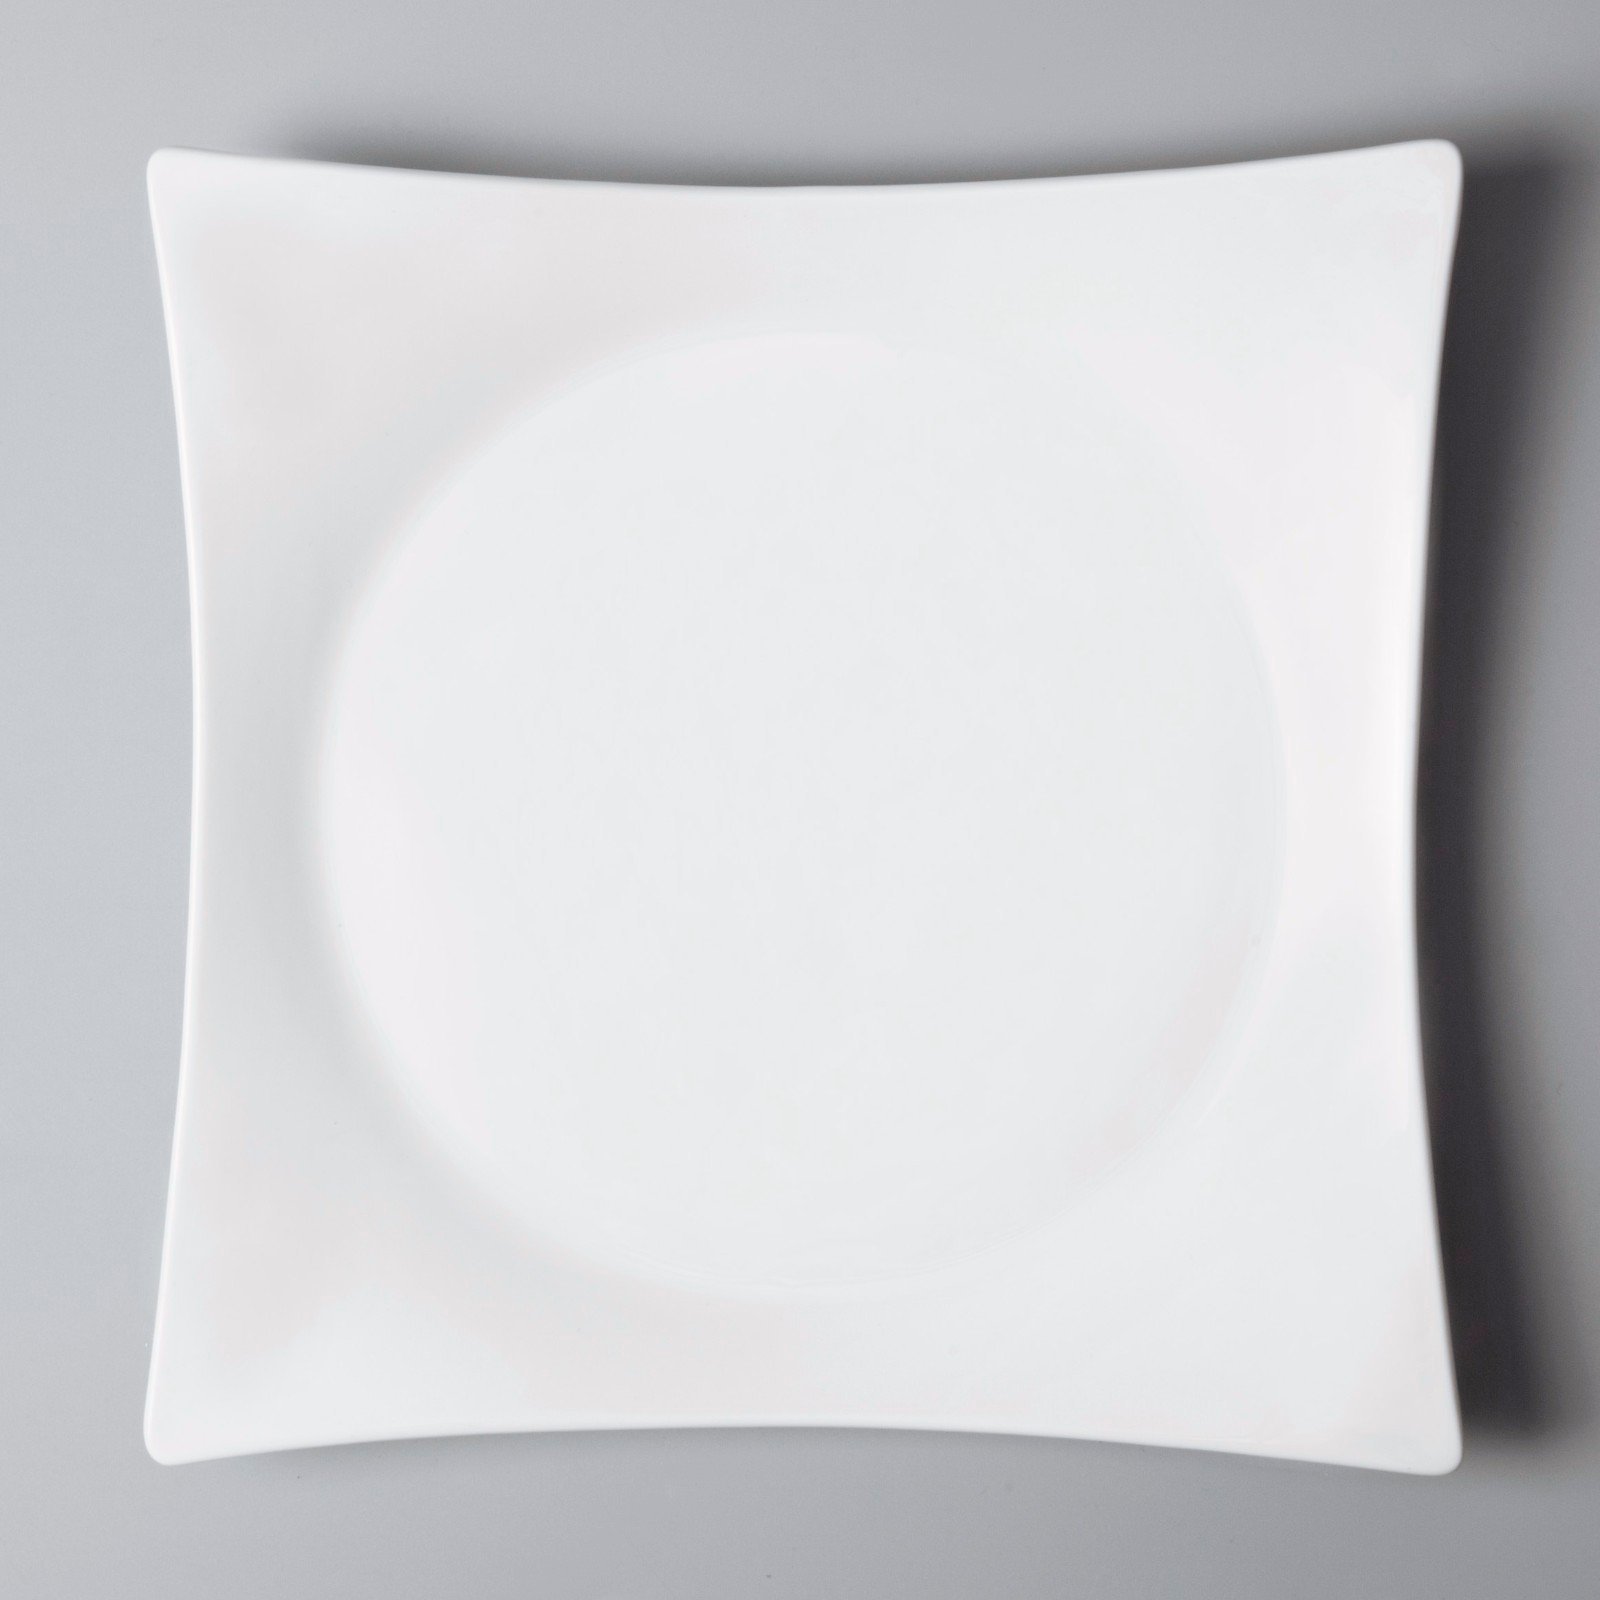 Two Eight Brand casual french white porcelain tableware italian